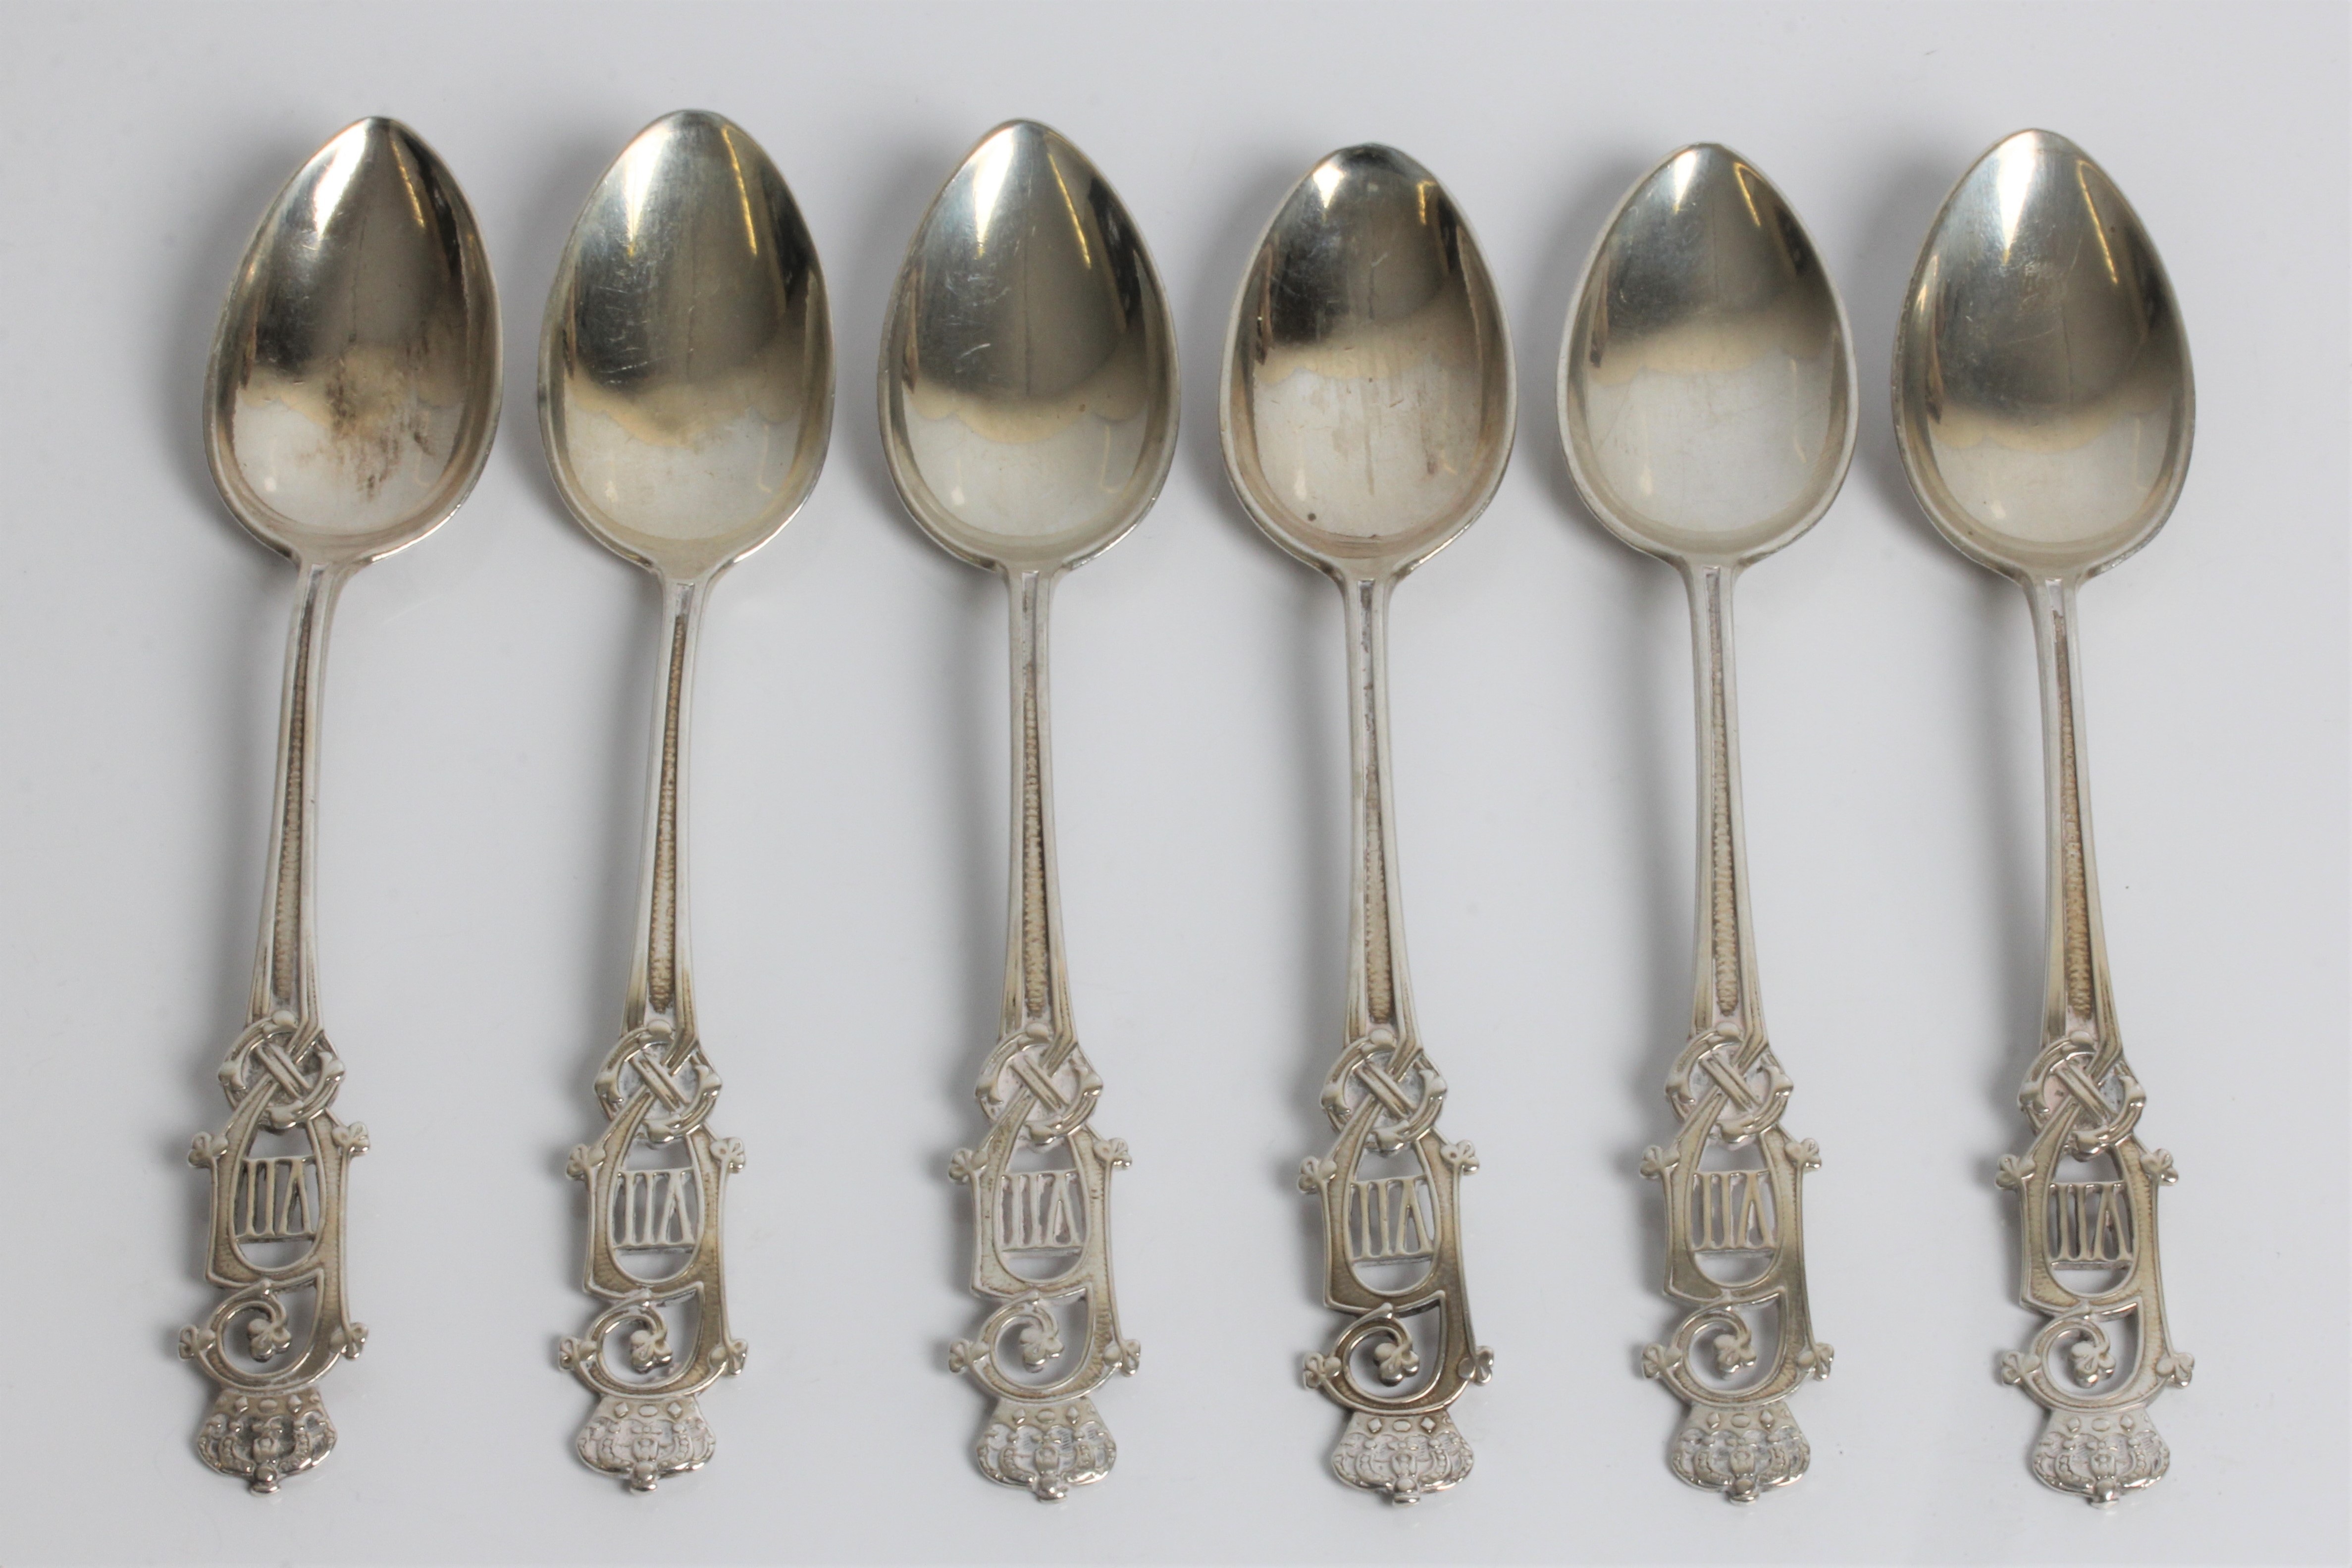 A set of six Norwegian silver Haakon VII coronation souvenir teaspoons, with marks for 1906 and J.